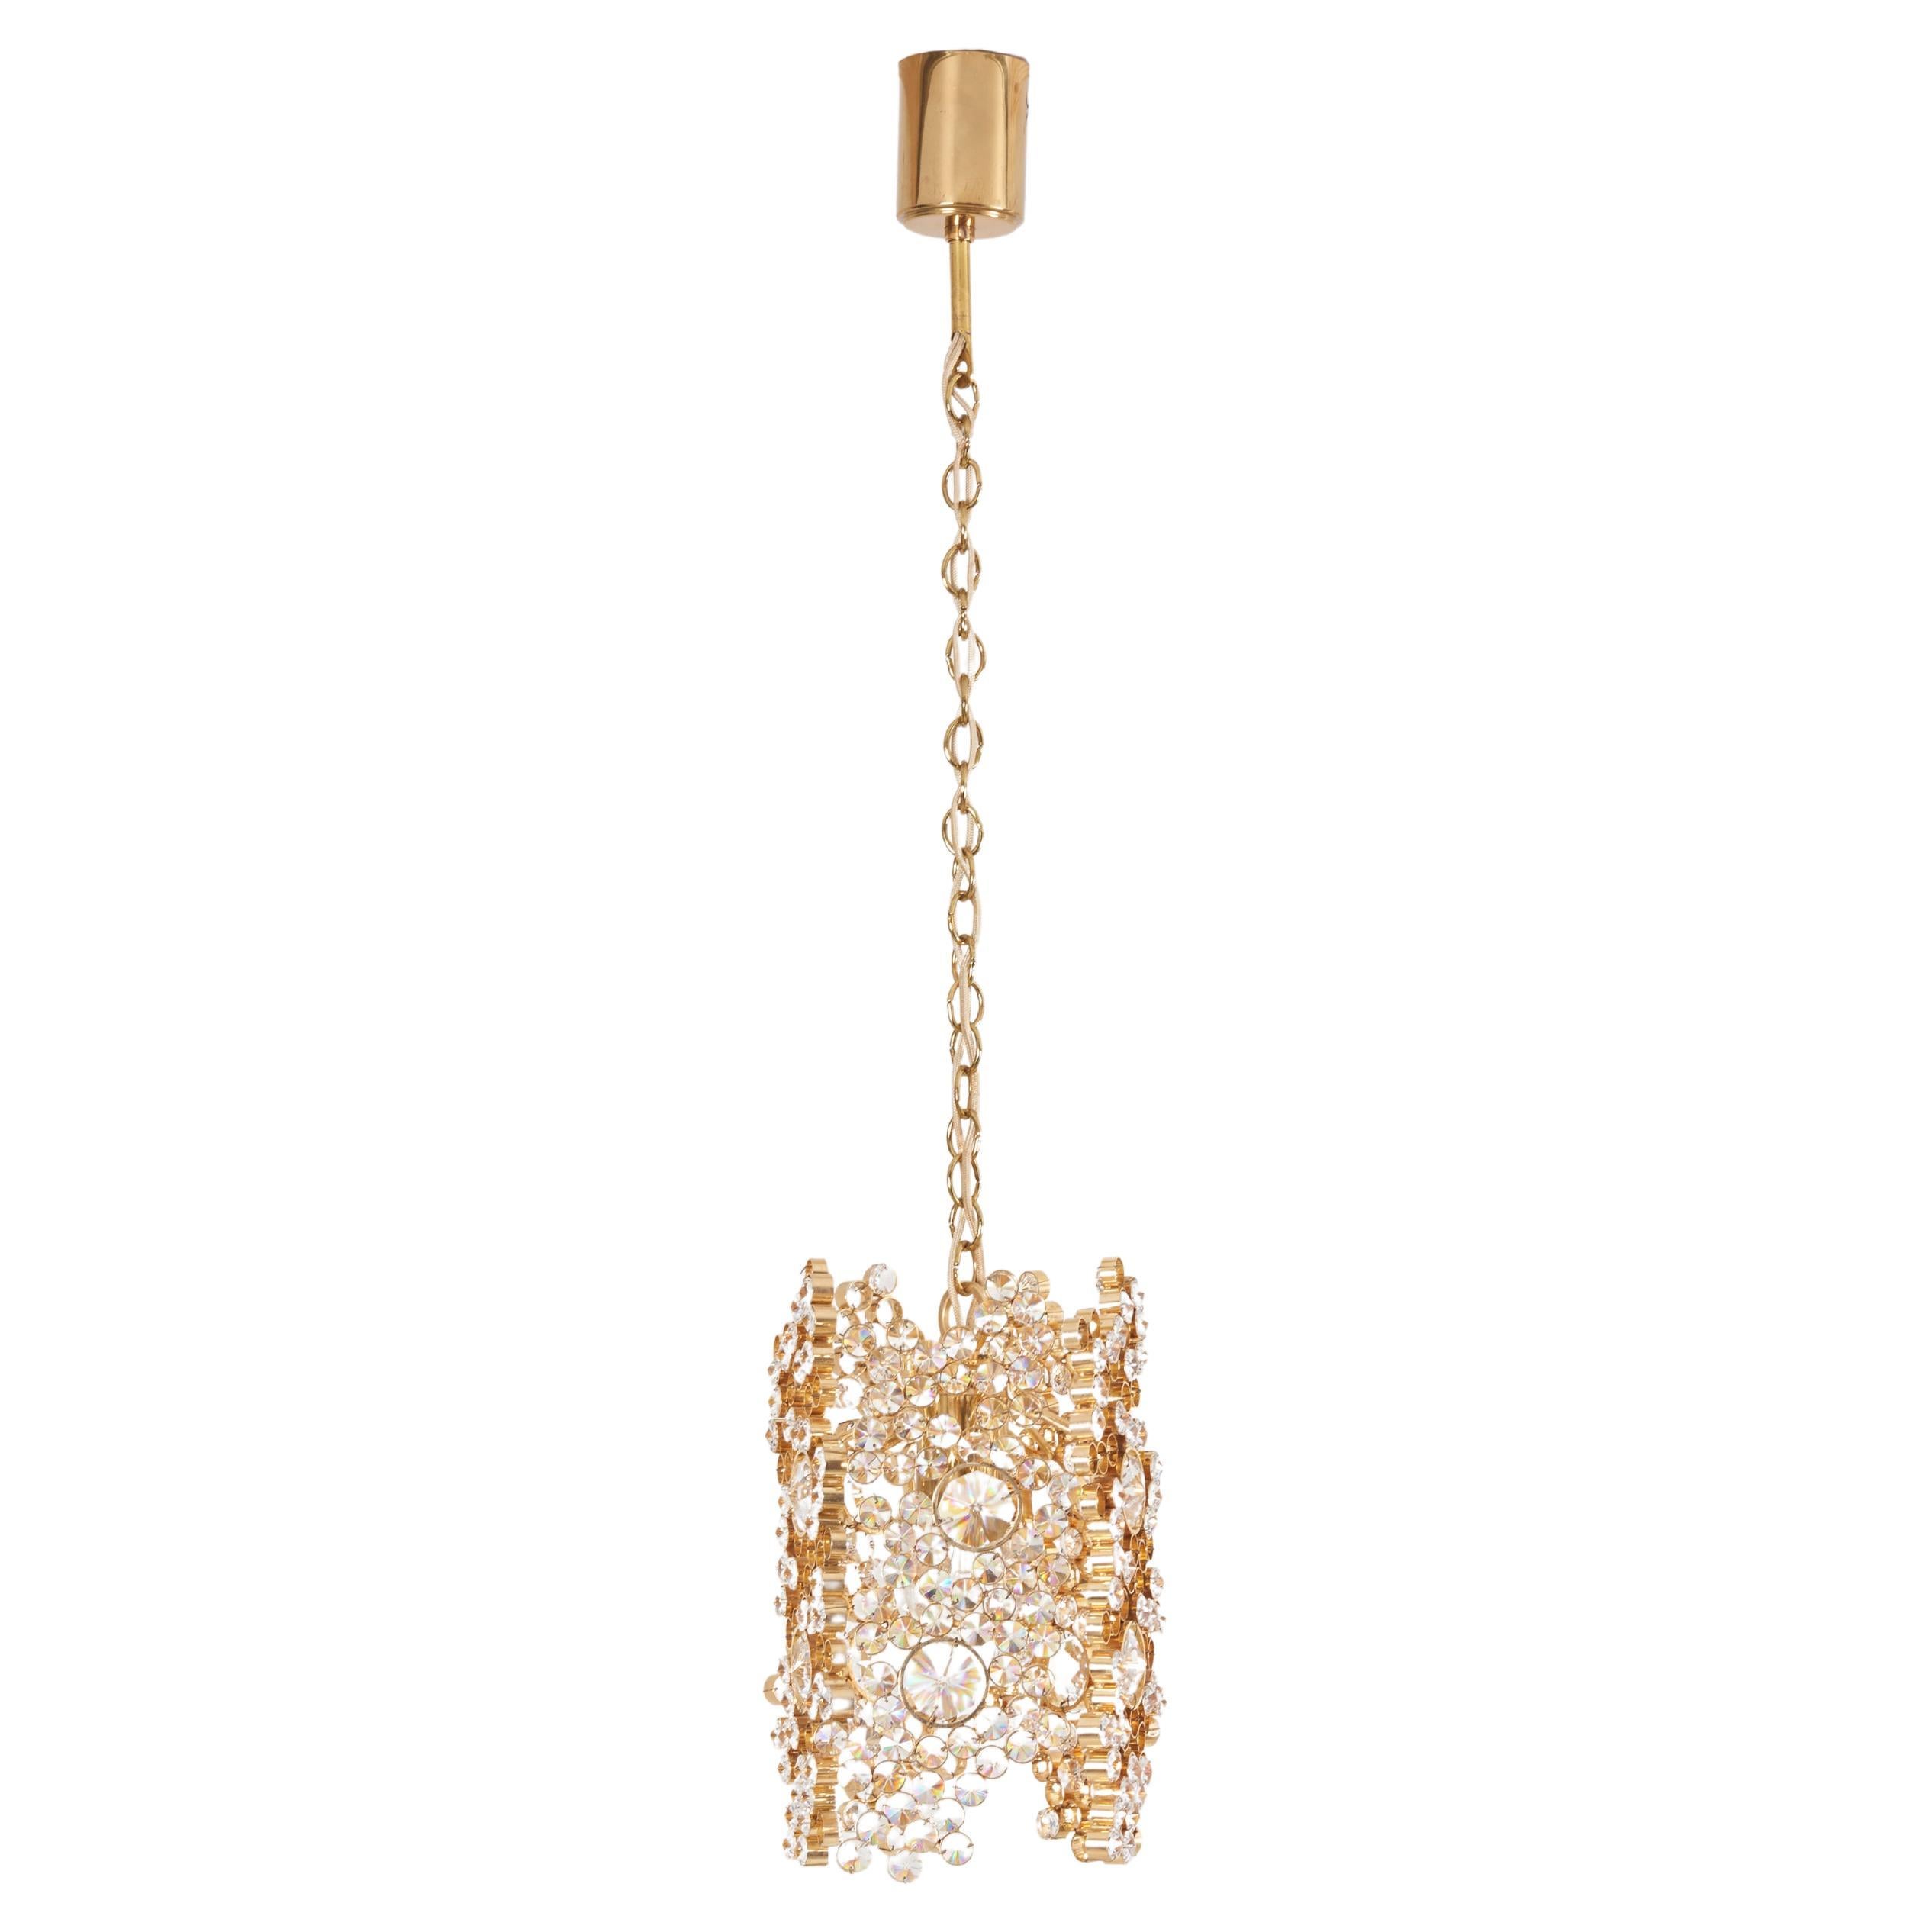 Palwa Gilded Brass and Crystal Glass Encrusted Pendant Lamp For Sale